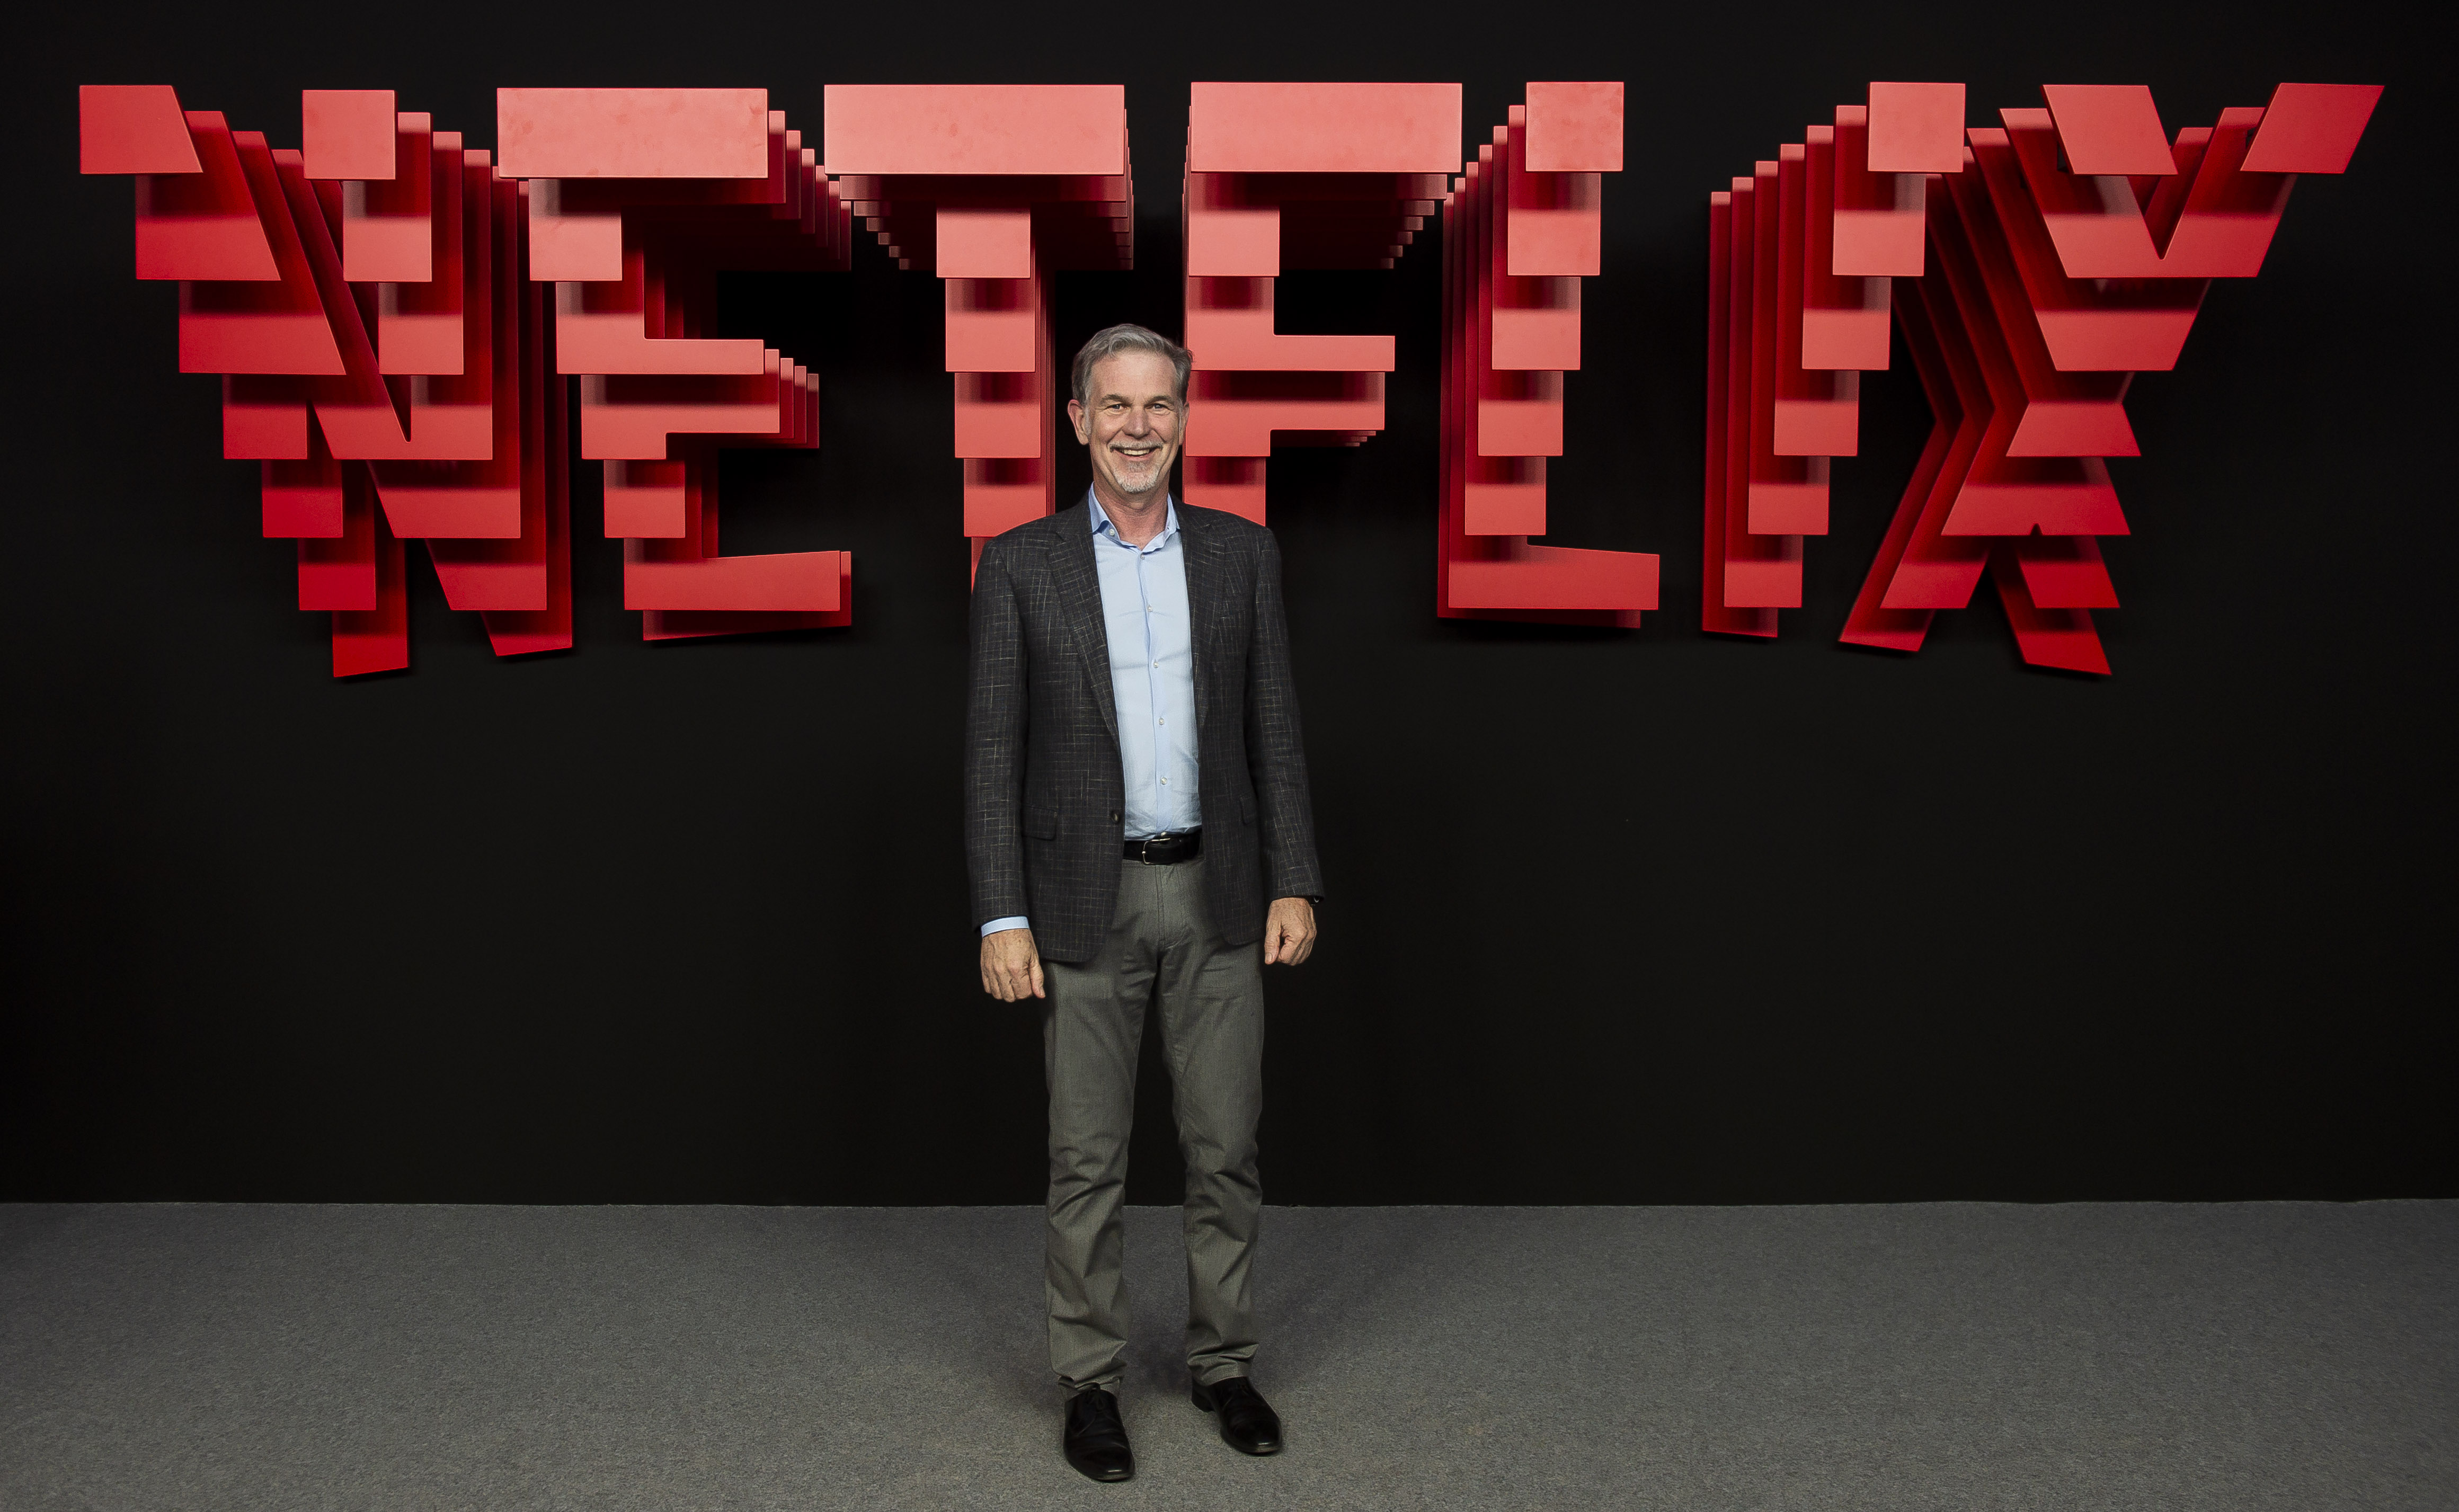 Reed Hastings standing in front of a large sign that says “Netflix.”